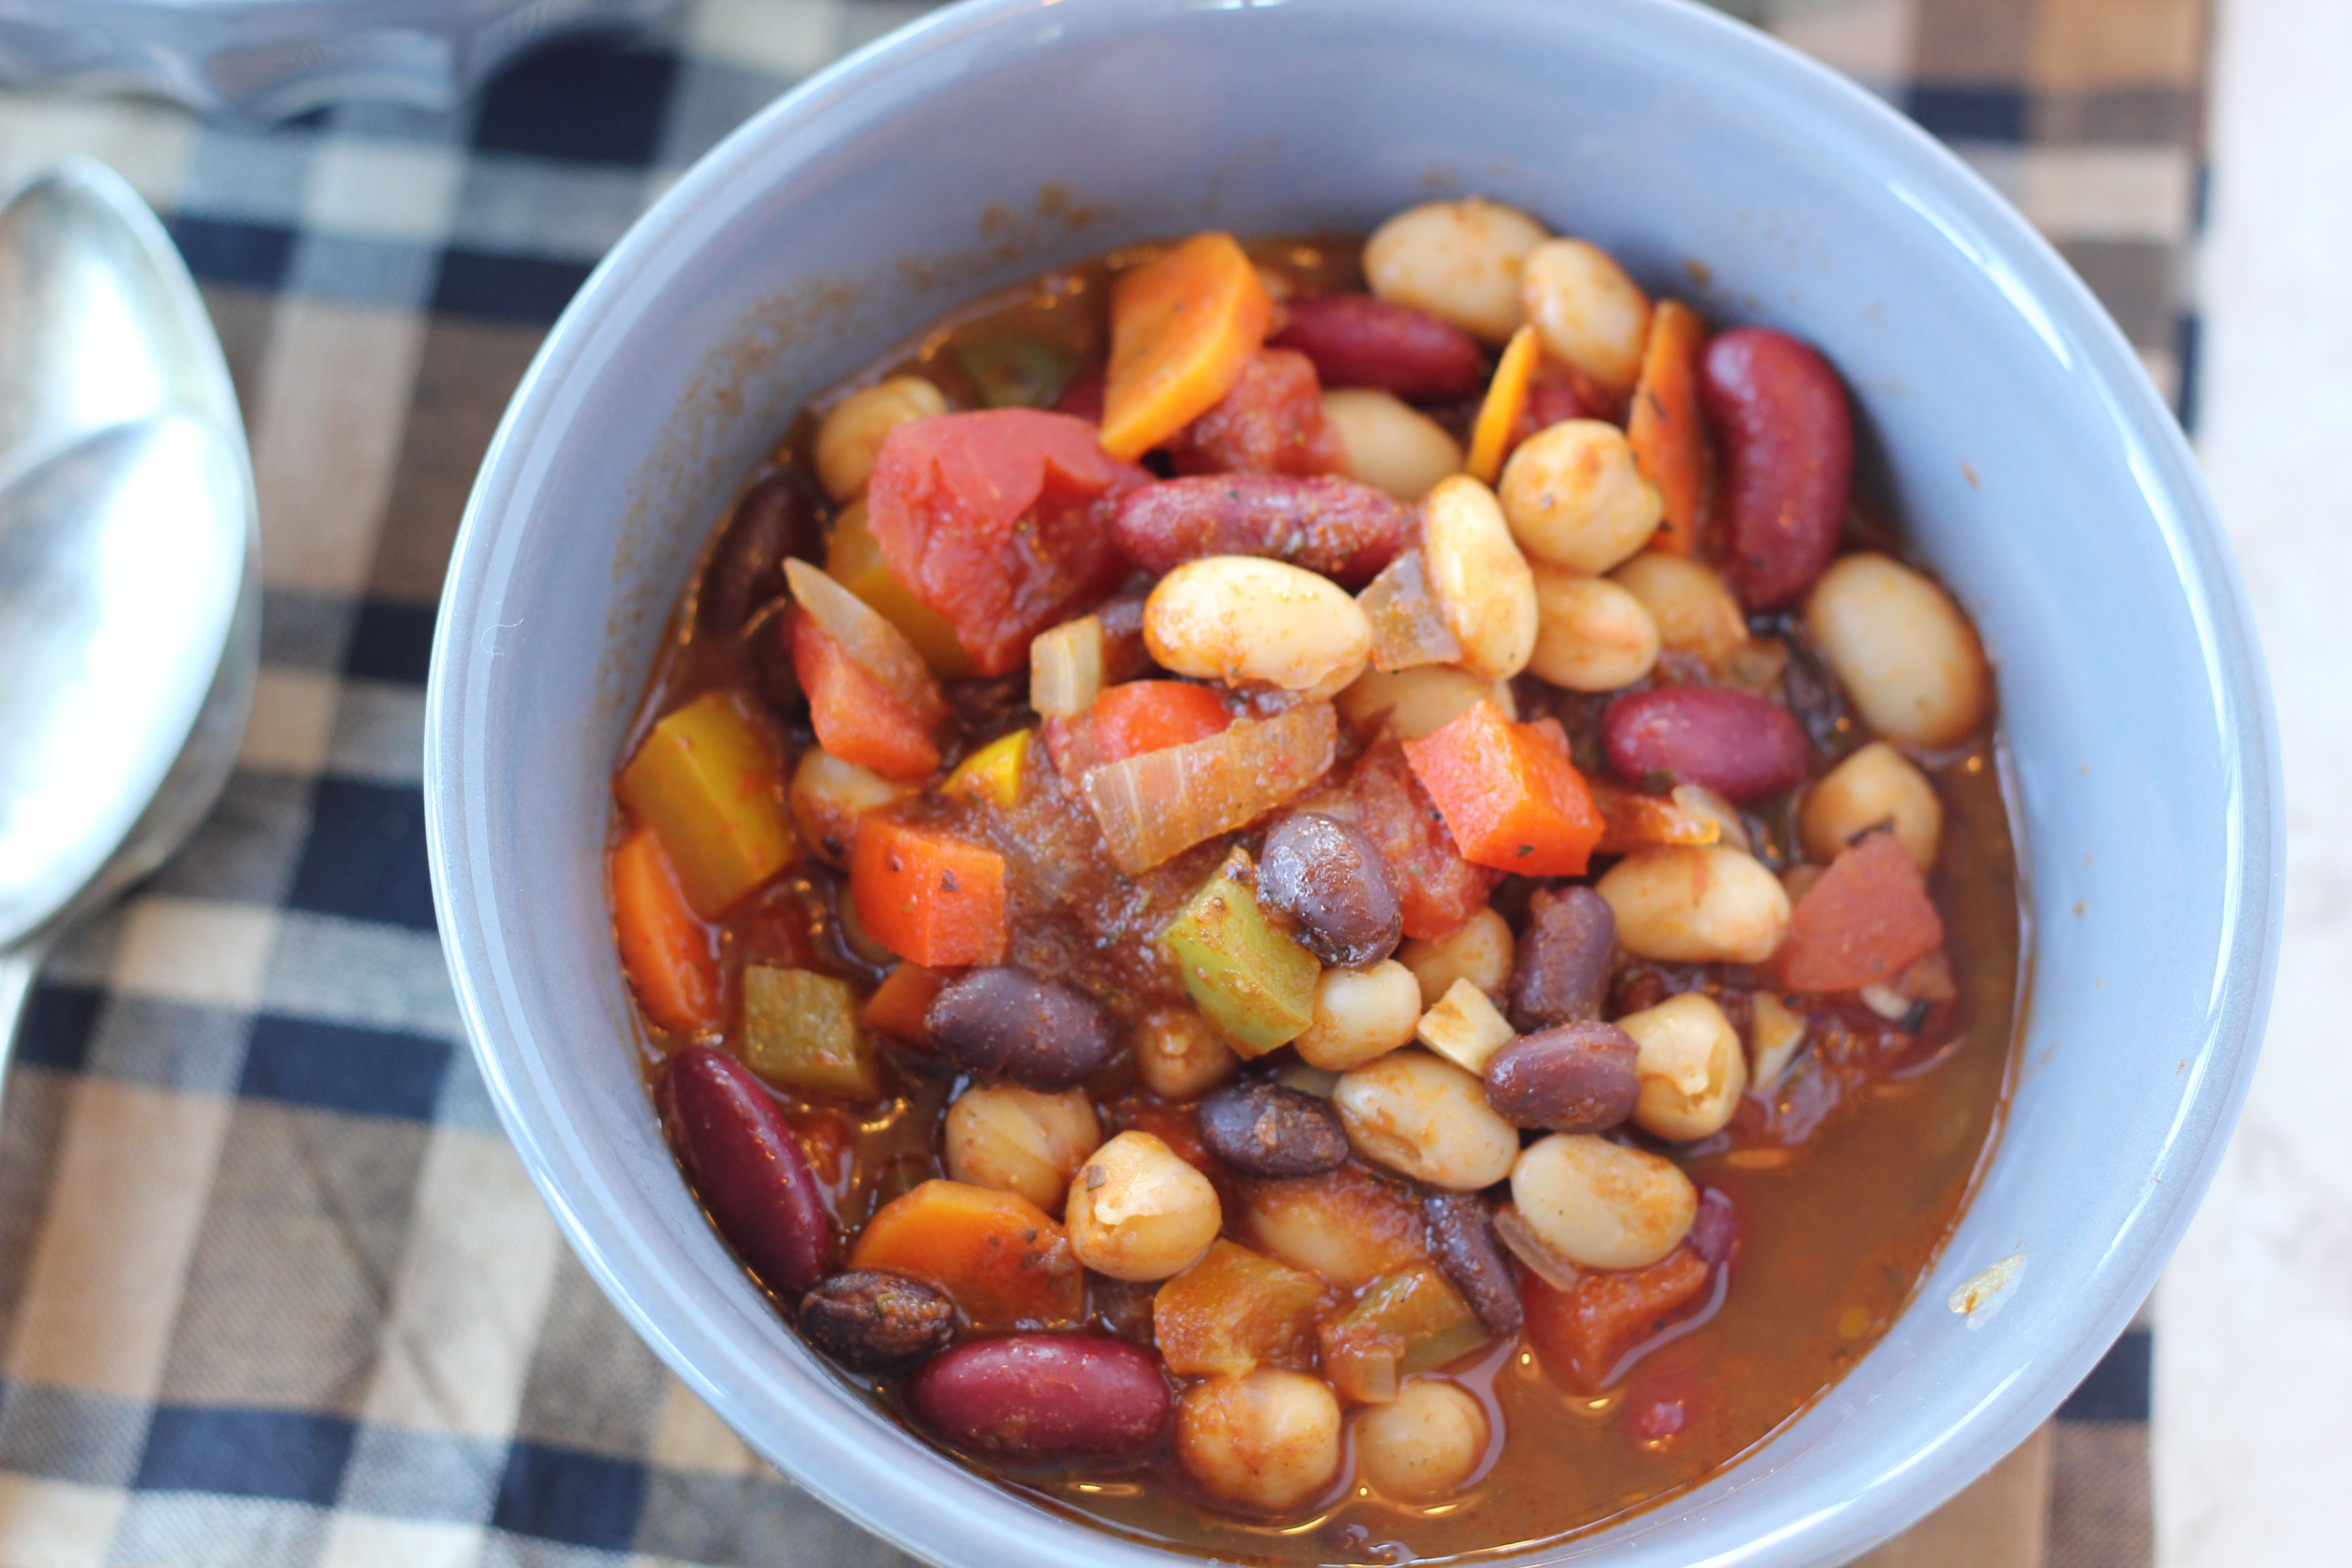 An image depicting the vegetarian chili recipe